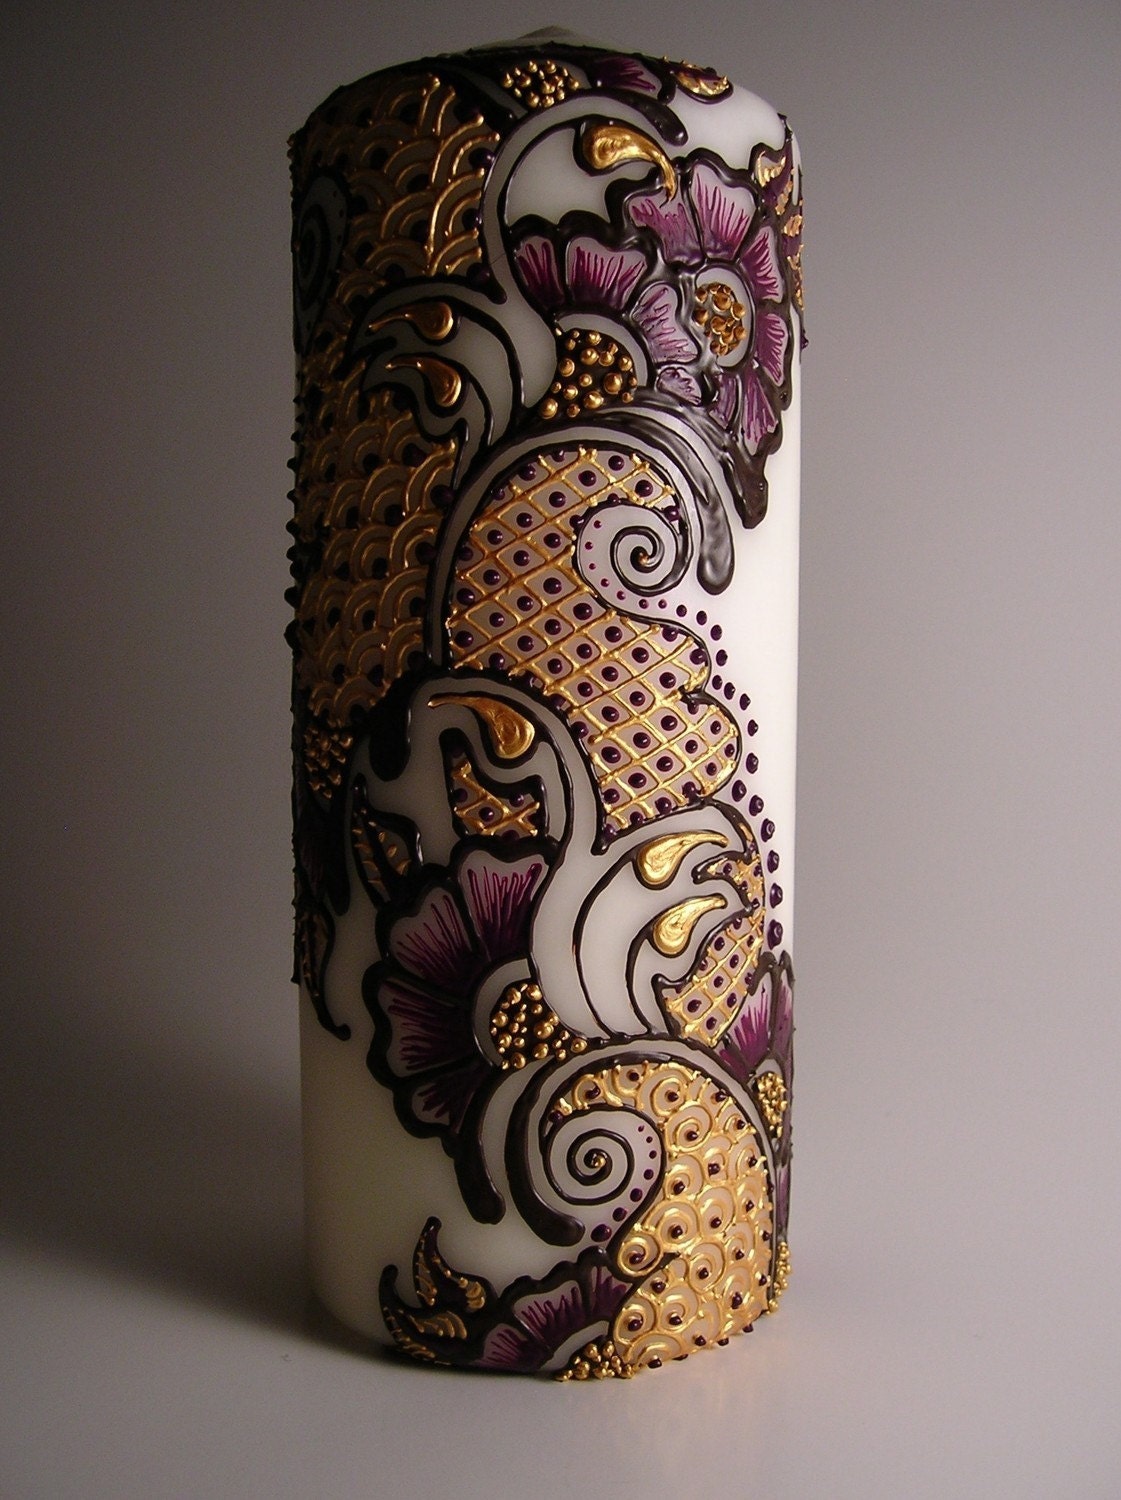 Buttery Gold and Violet Pillar Candle with Henna Inspired Design